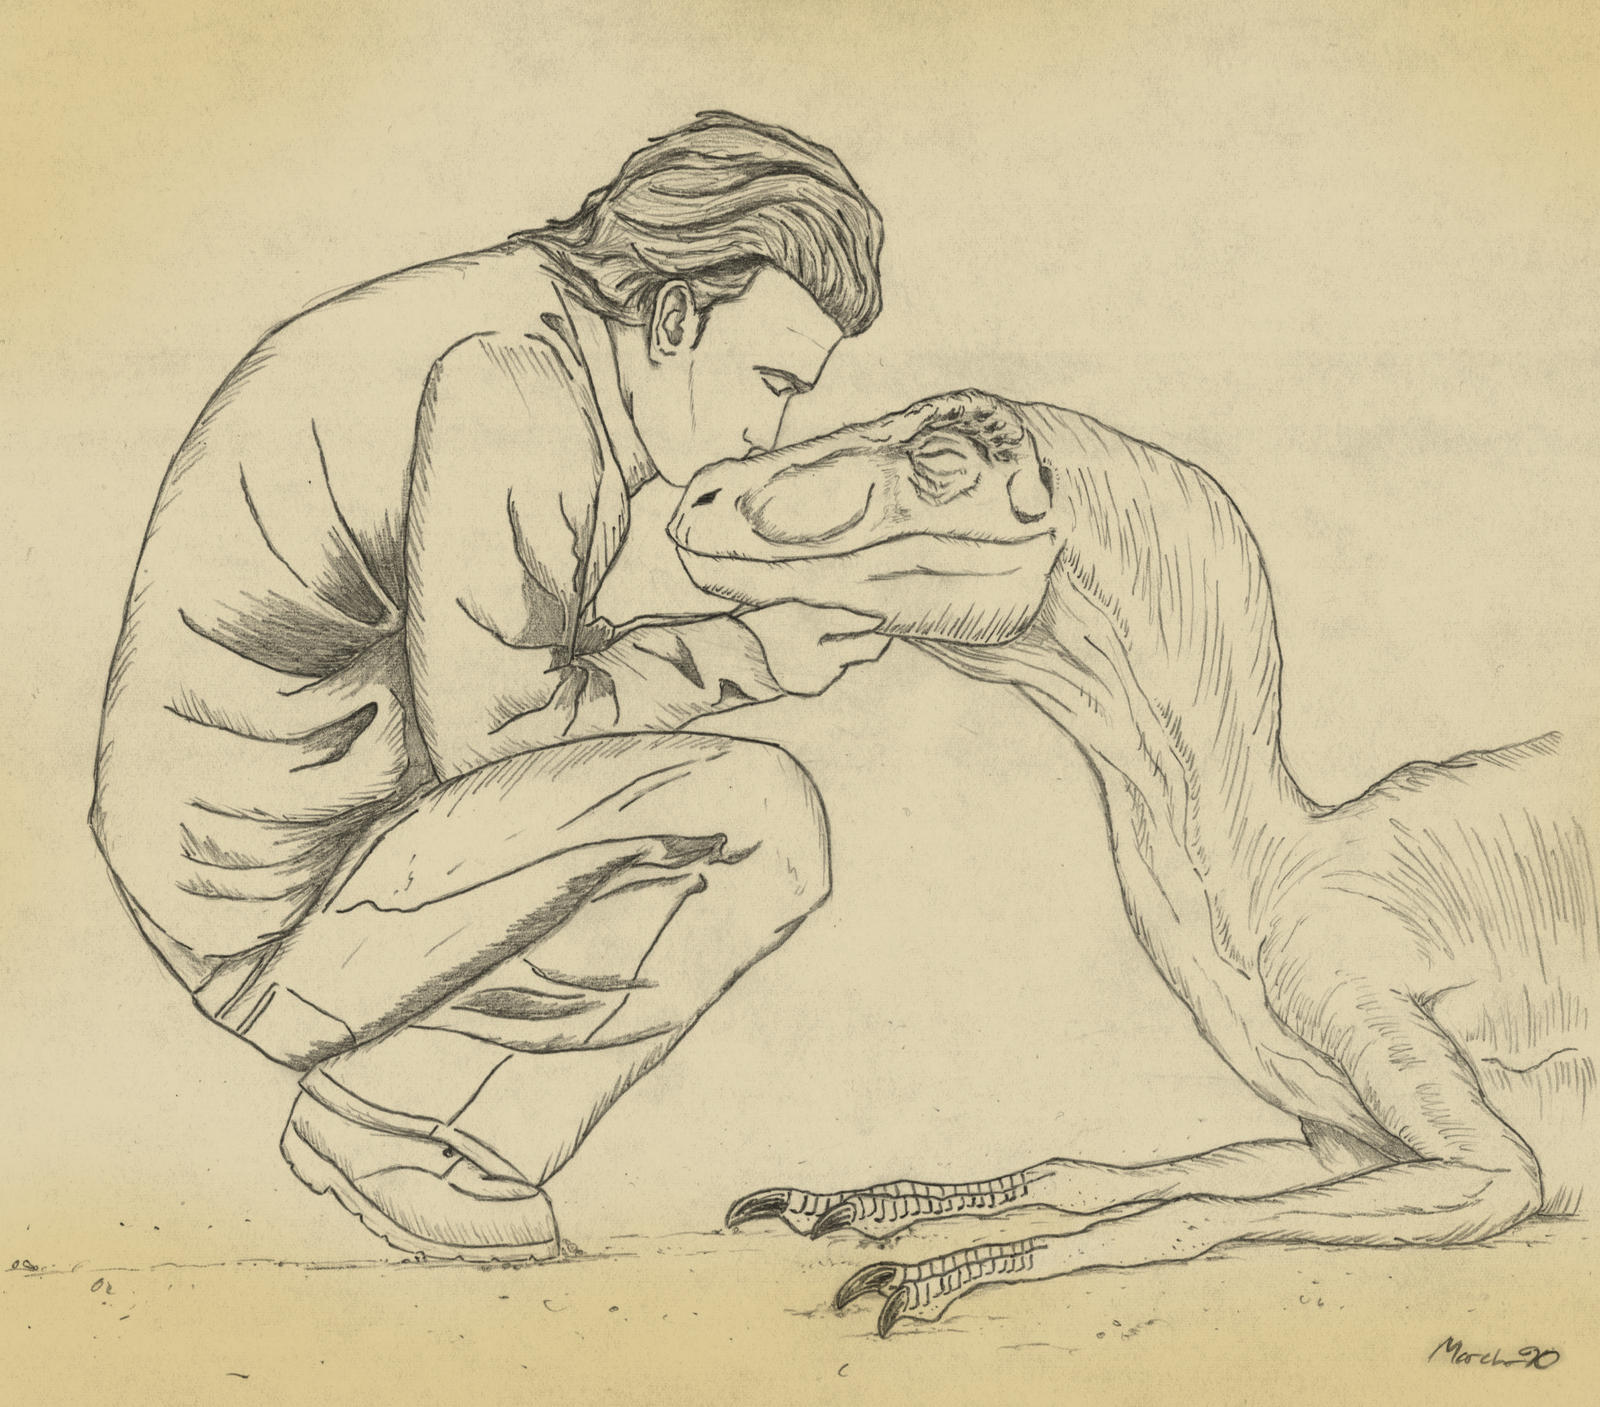 richard_levine_and_velociraptor_by_march90-d7wmhqk.jpg